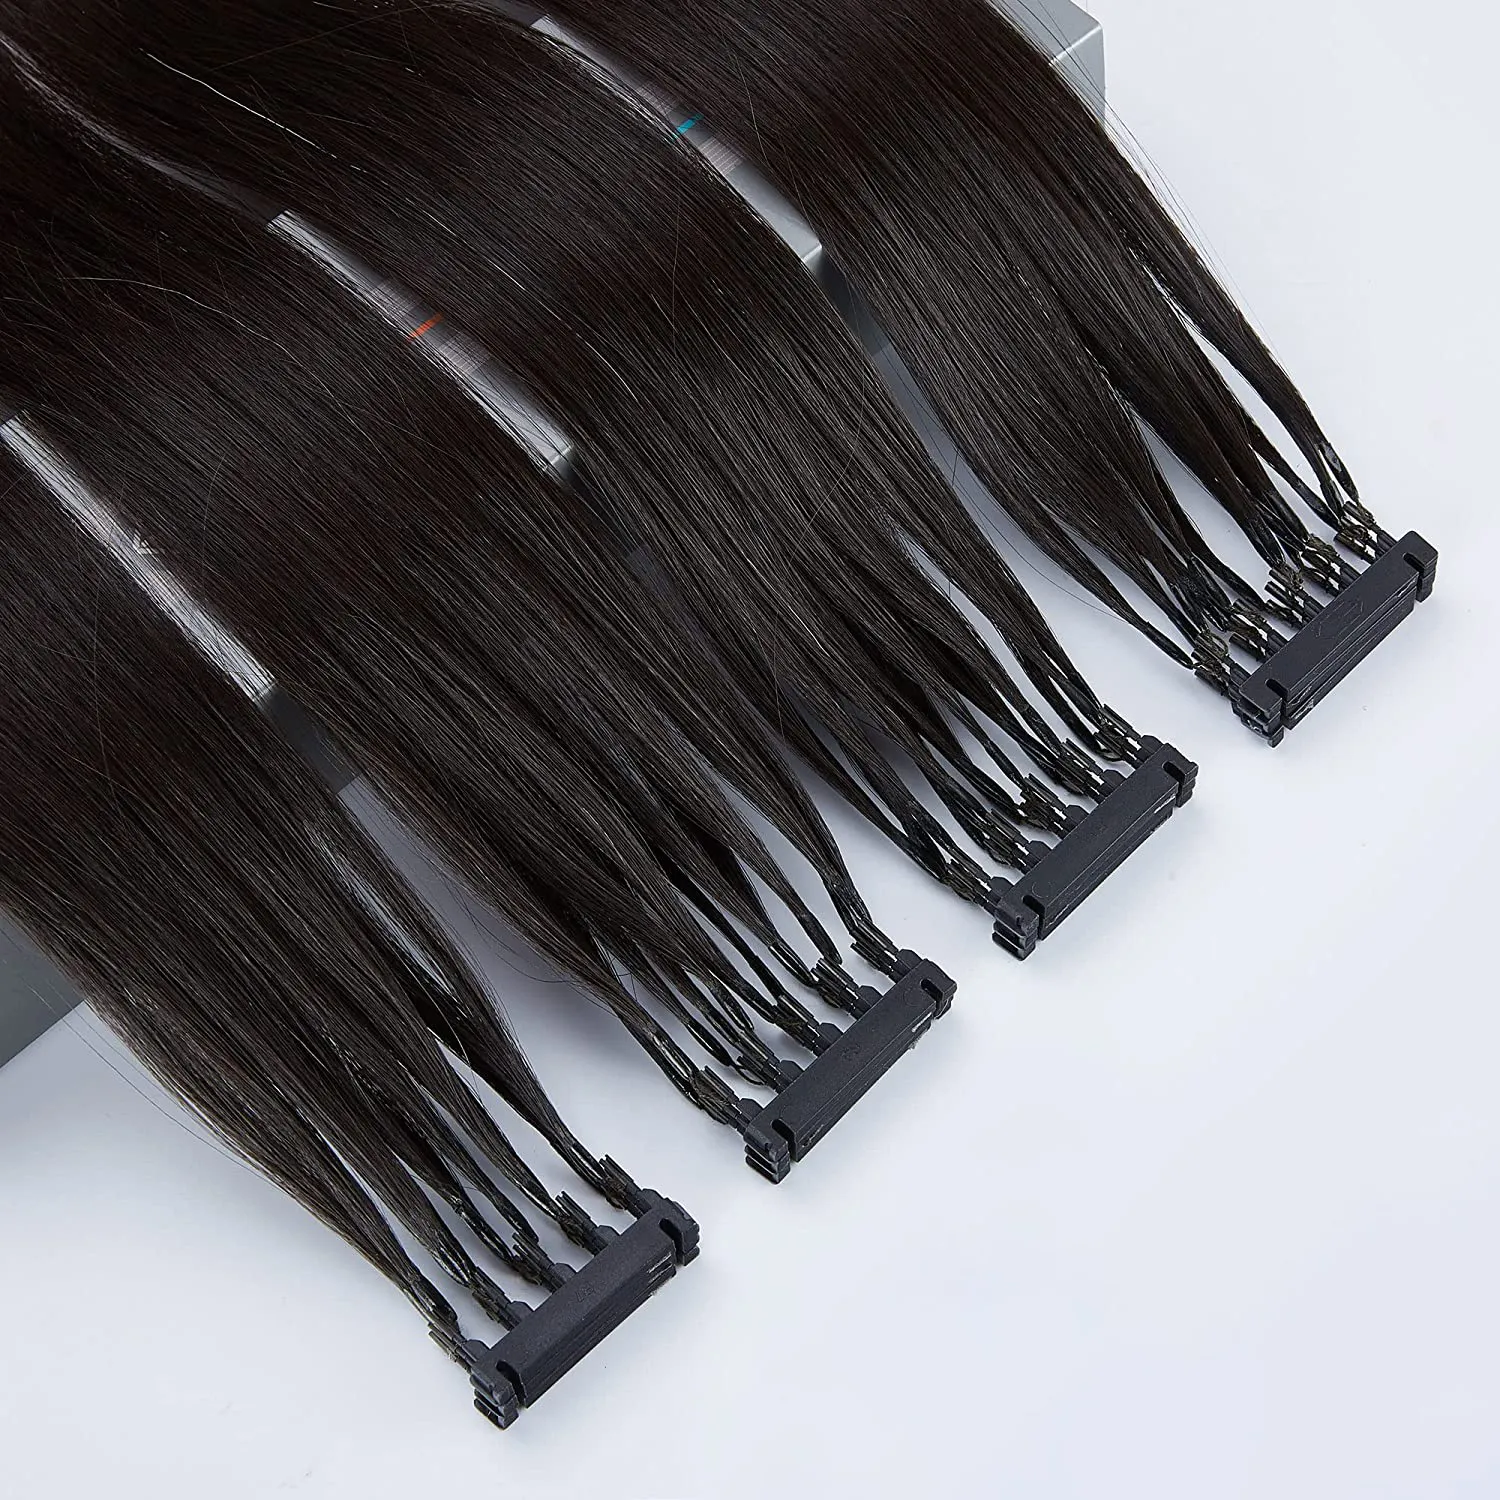 6d hair extensions machine Quad Weft mini tape in real human hair extensions